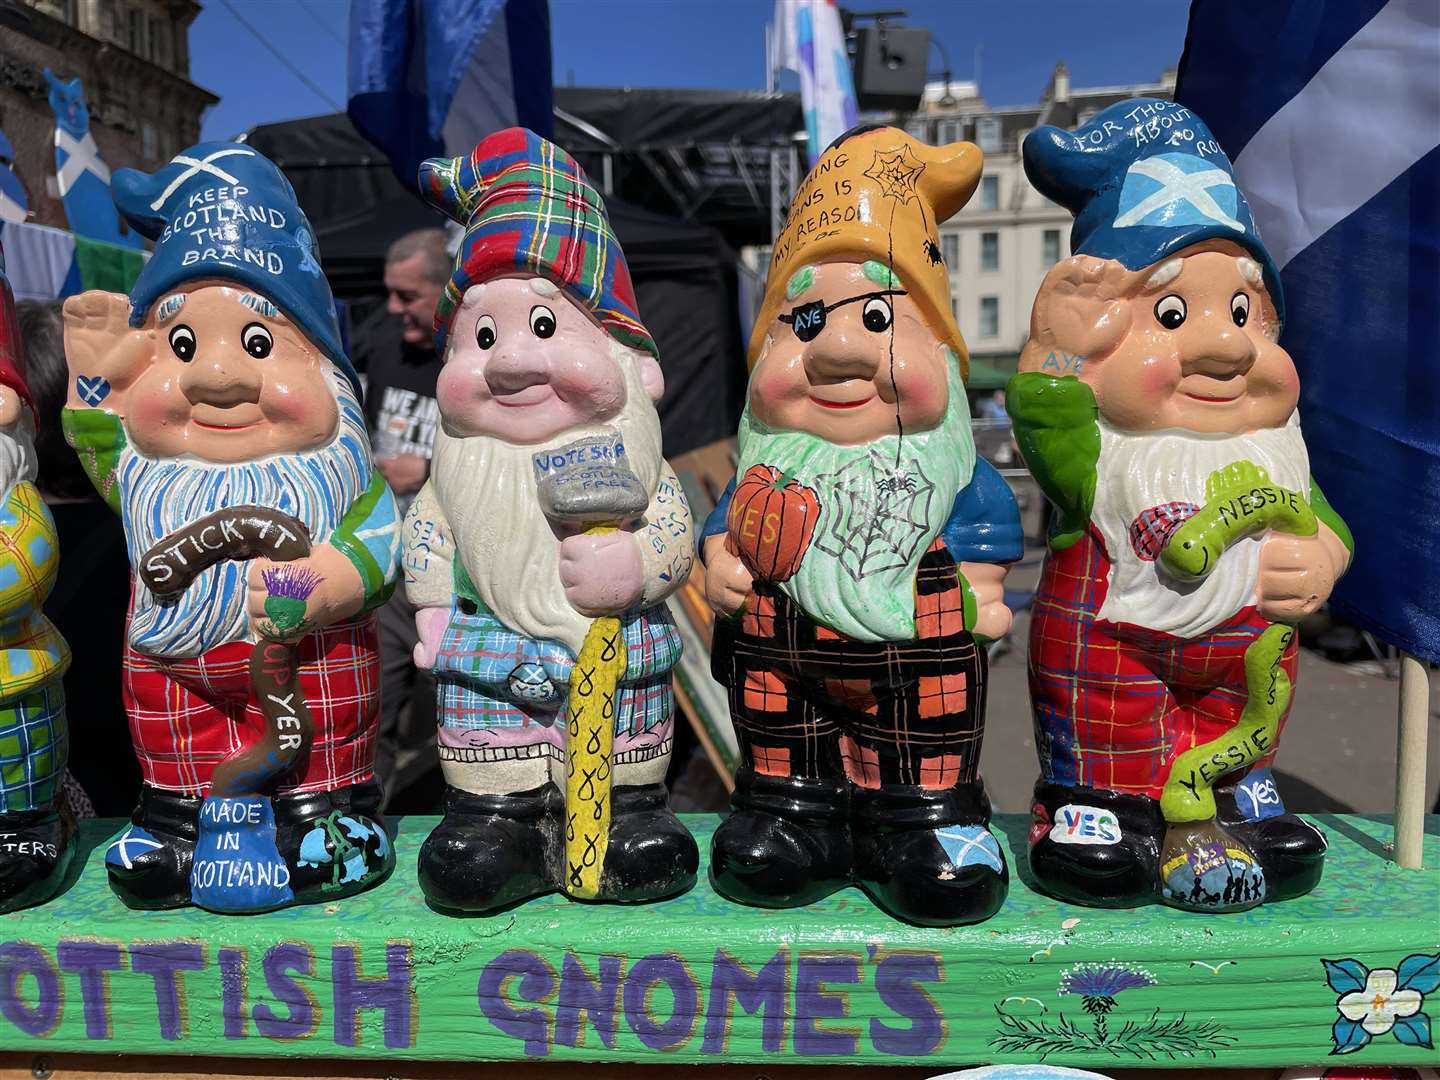 Garden gnomes decorated to support Scottish independence (Sarah Ward/PA)